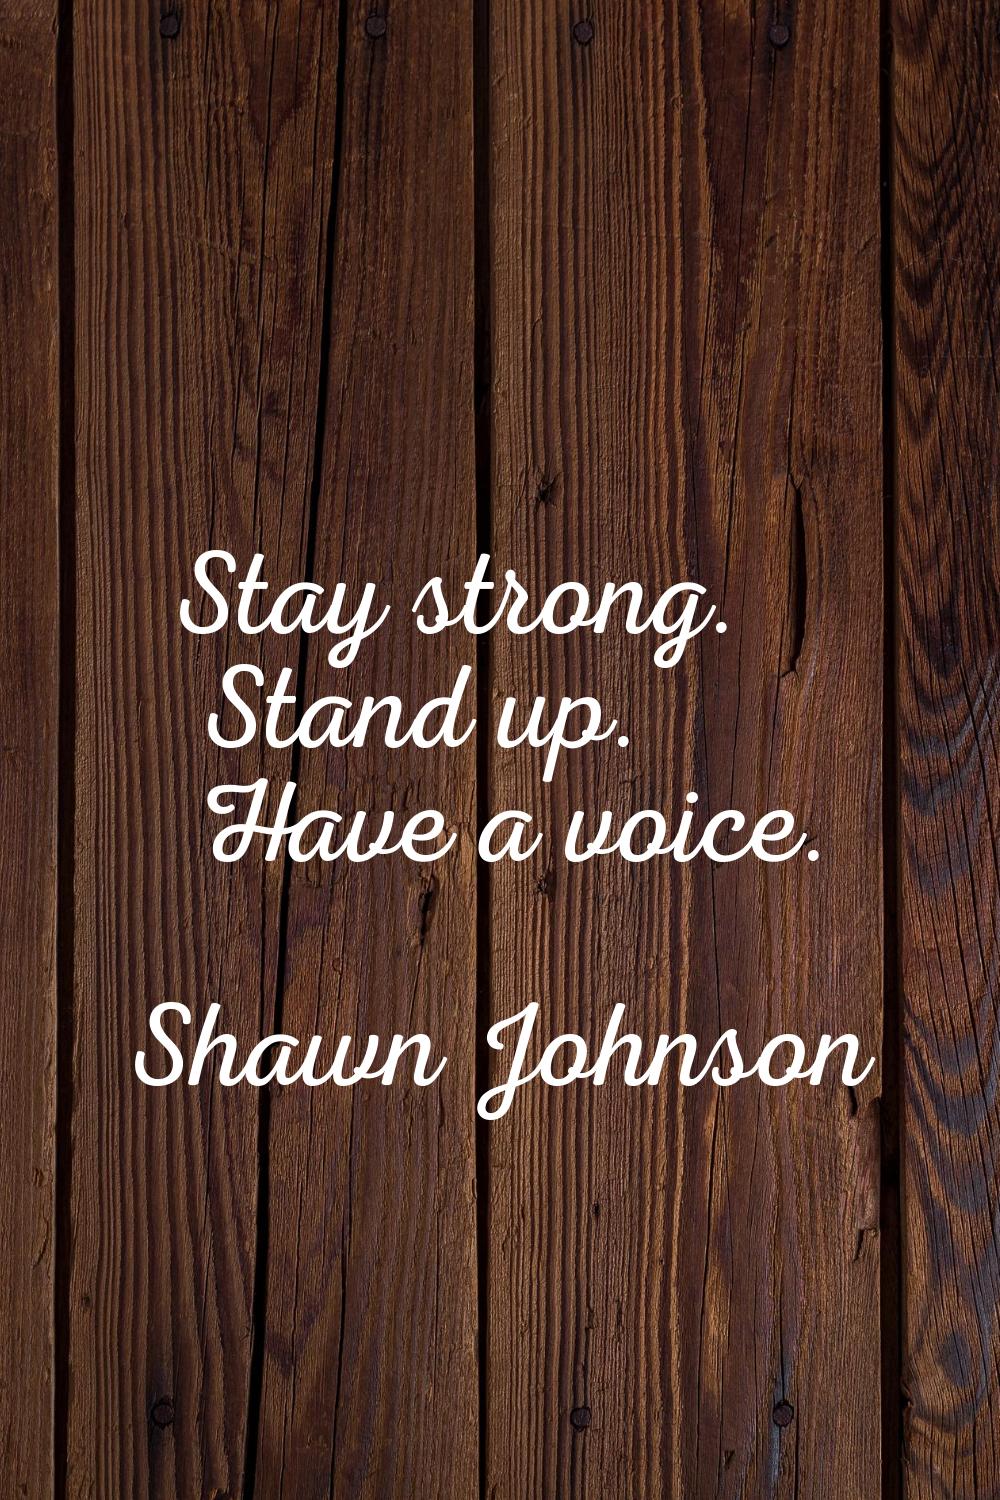 Stay strong. Stand up. Have a voice.